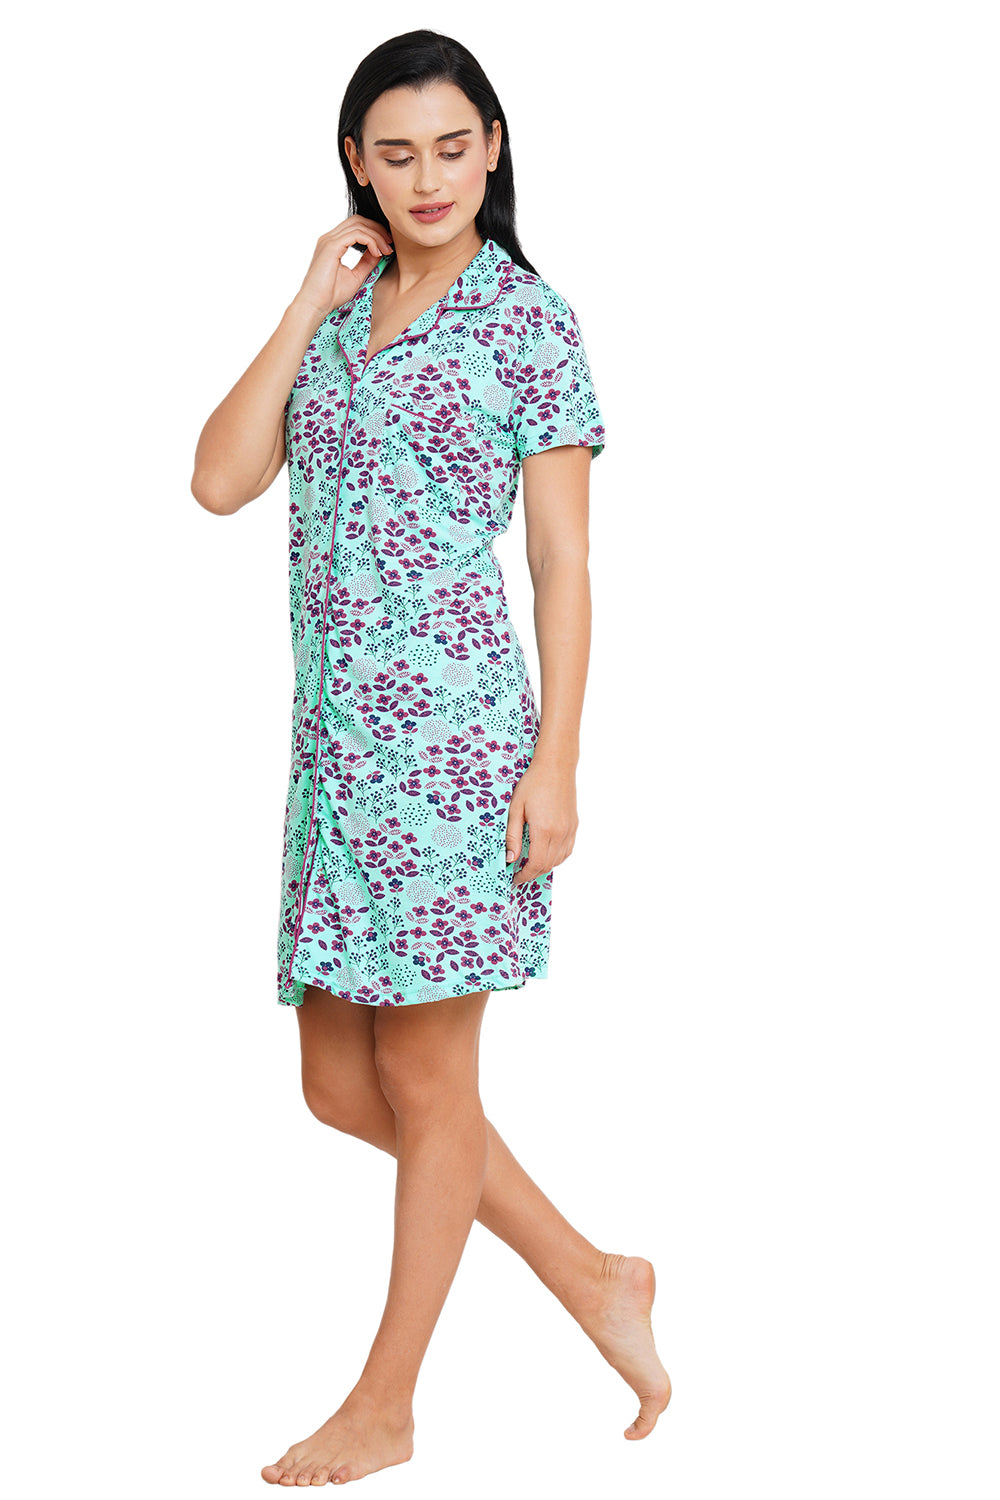 Organic Cotton and Bamboo fibre sleep shirt with a hairband-ISL024-Eclectic floral print